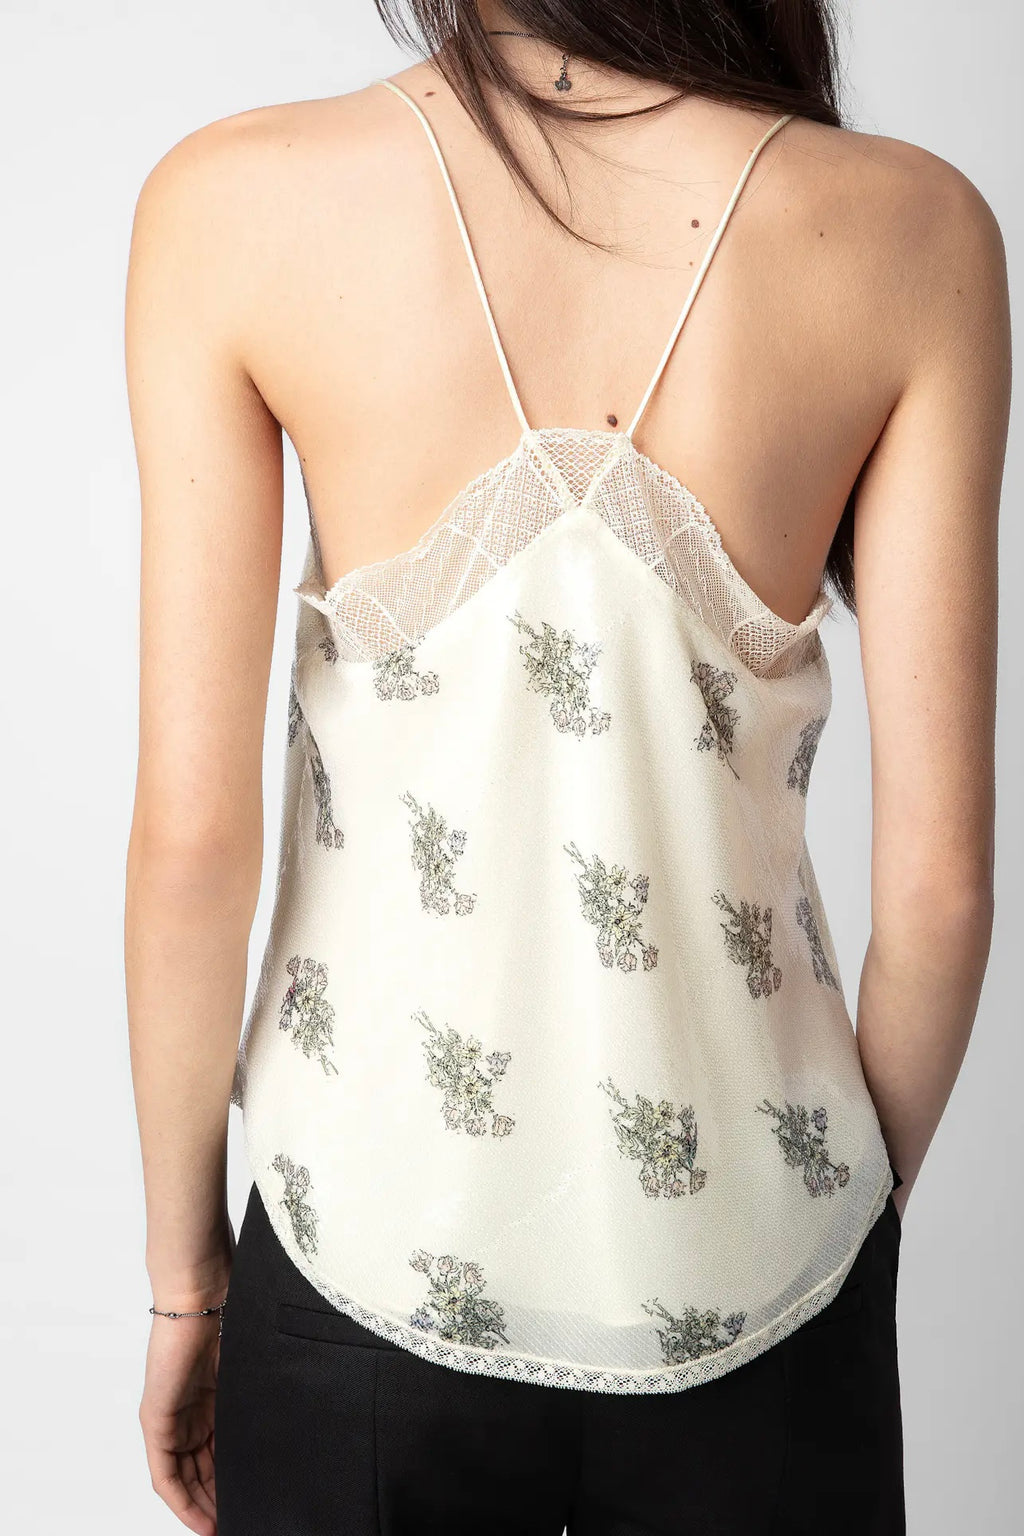 Zadig & Voltaire - Christy Sequin Flowers Camisole